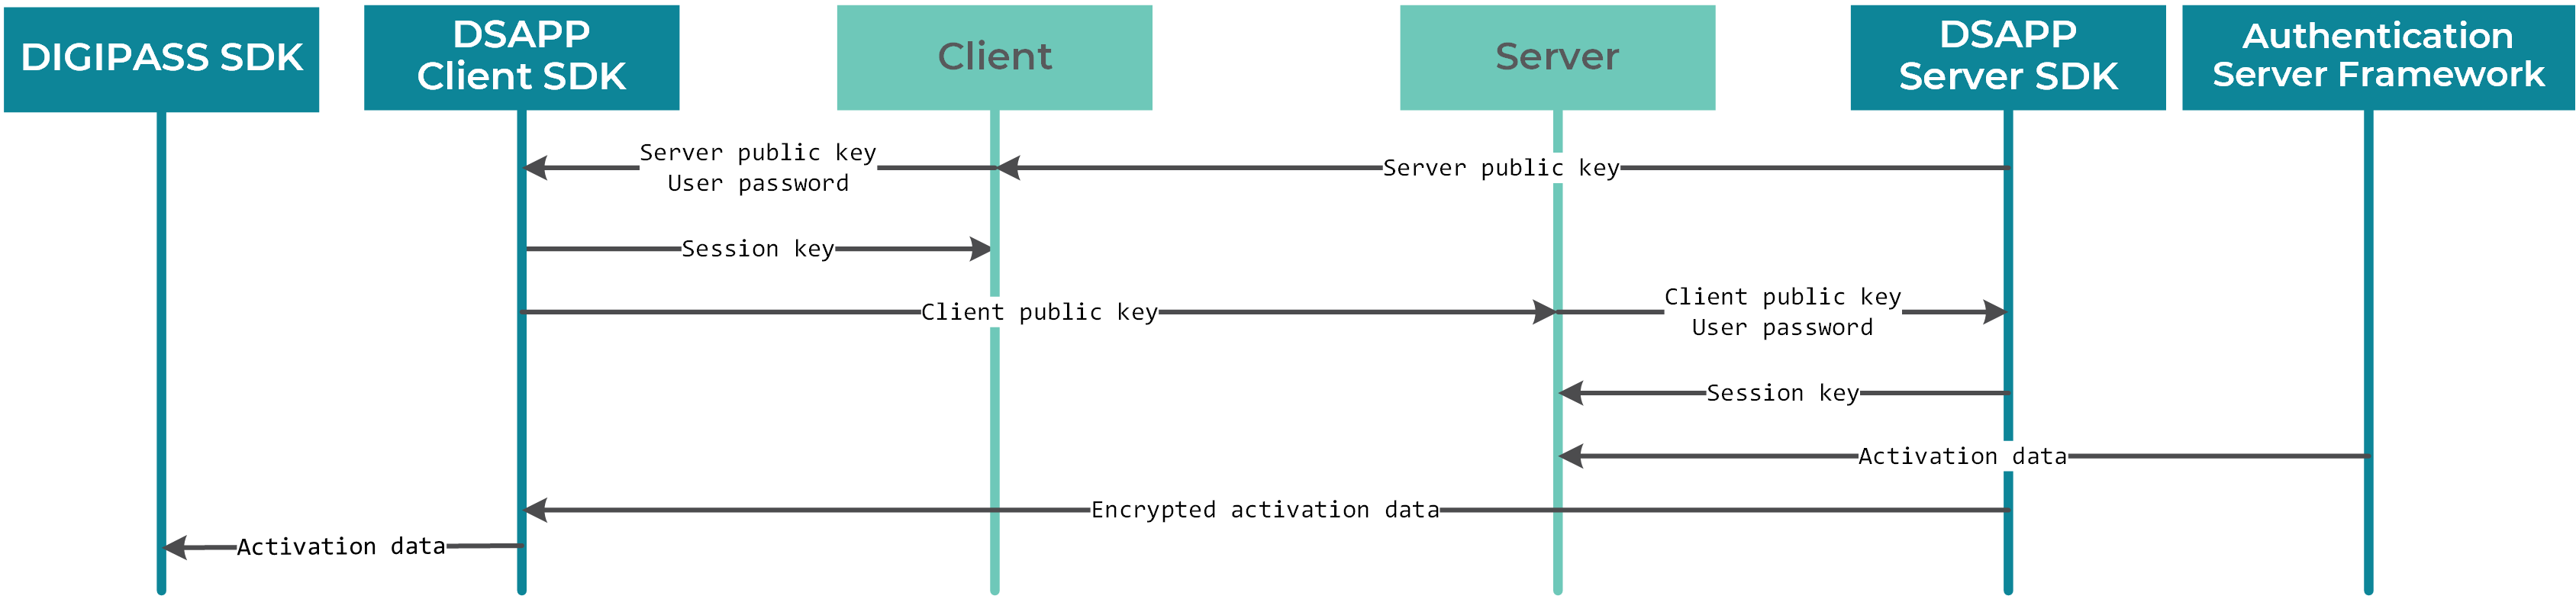 Overview of activation data transfer protection with DSAPP